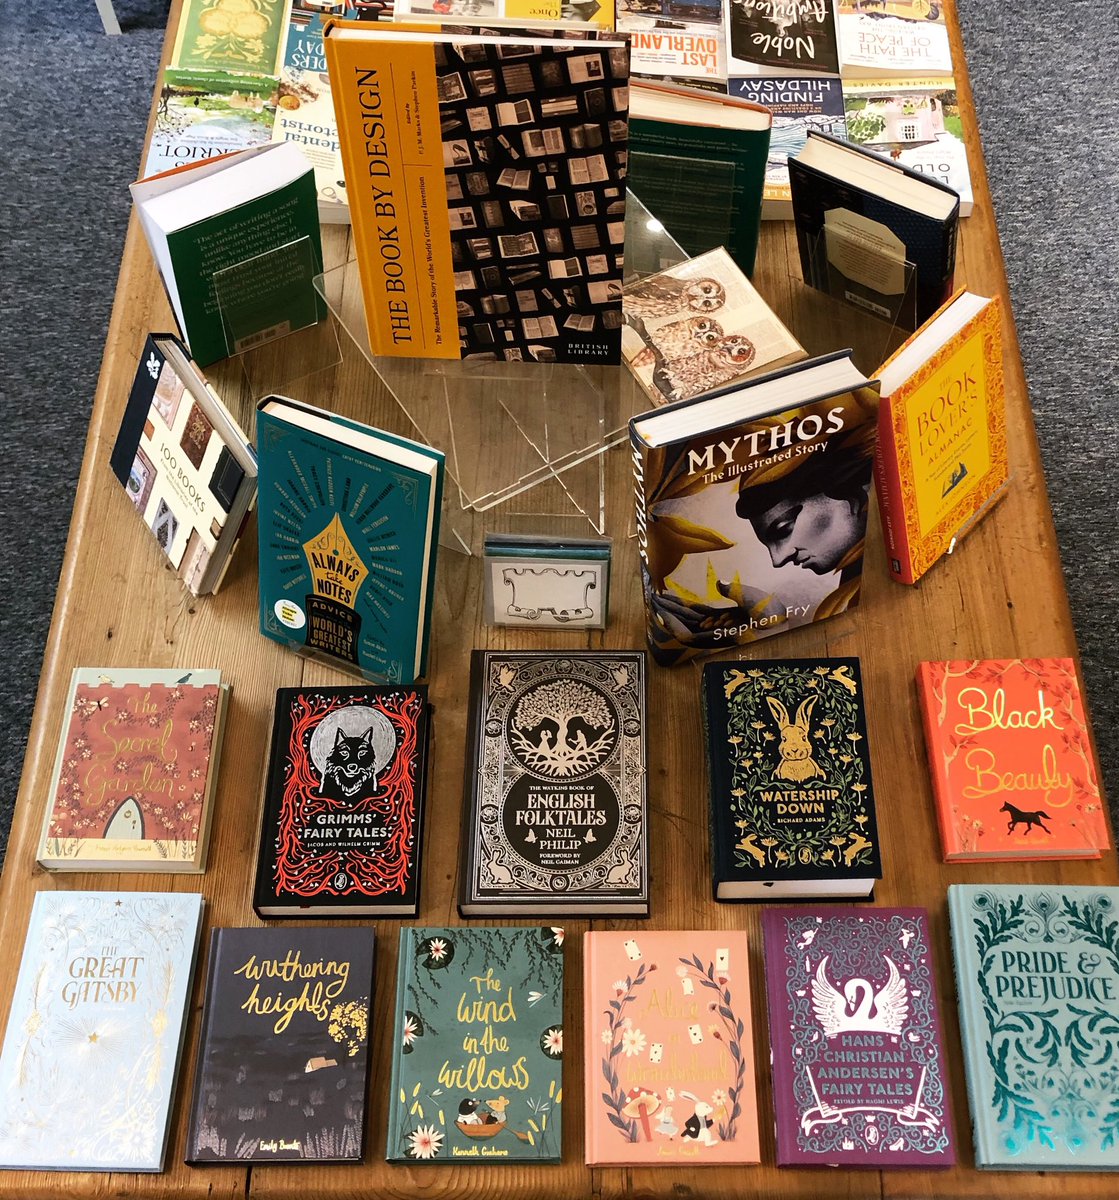 Beautiful hardback classic books, and books about… well, books 😅 Some of these editions cost as little as £8.99 - I think that’s a bit of a bargain! 🌟